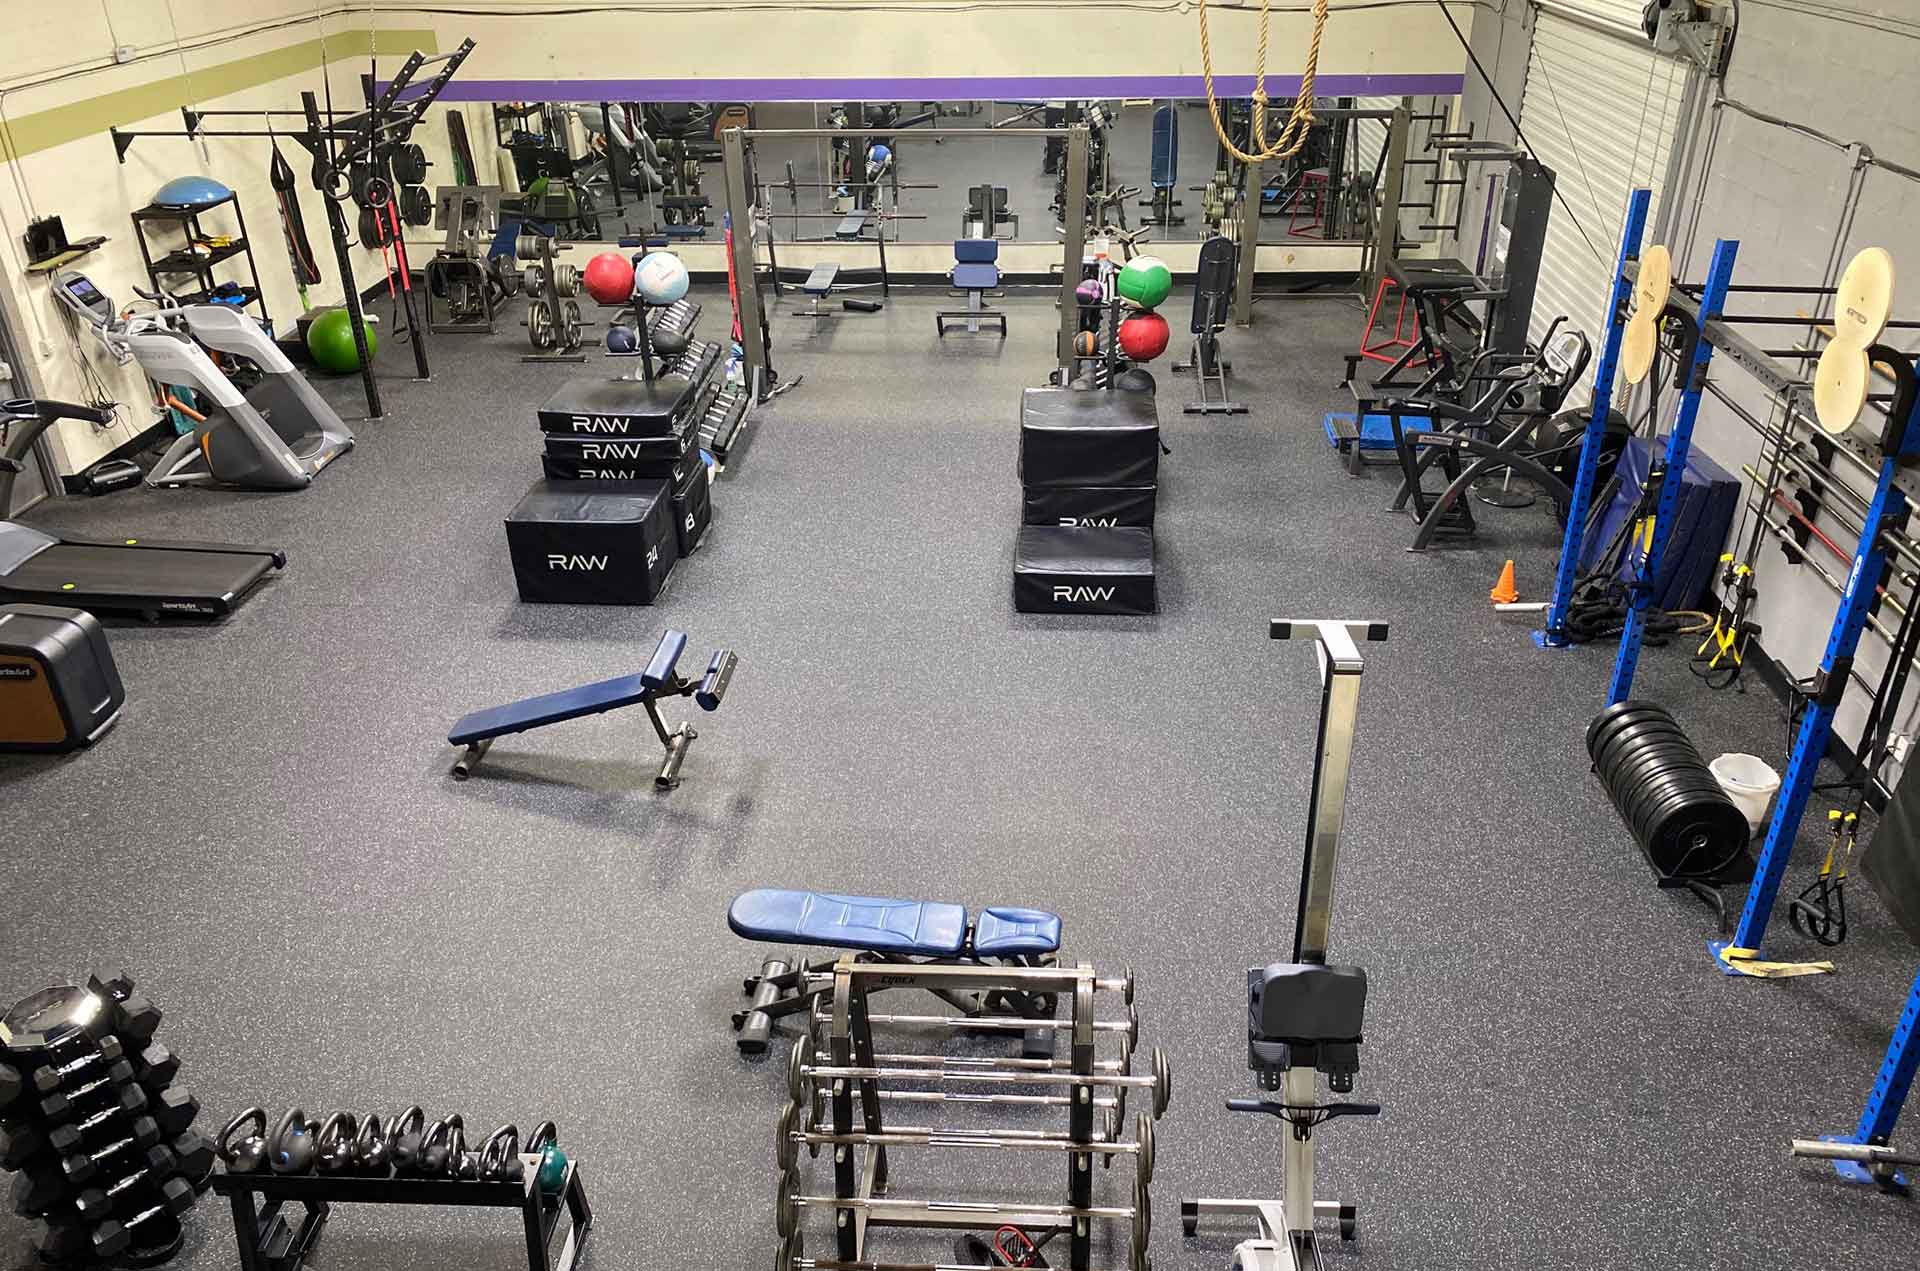 Personal Edge Fitness in Mobile Alabama - Personal trainer facility